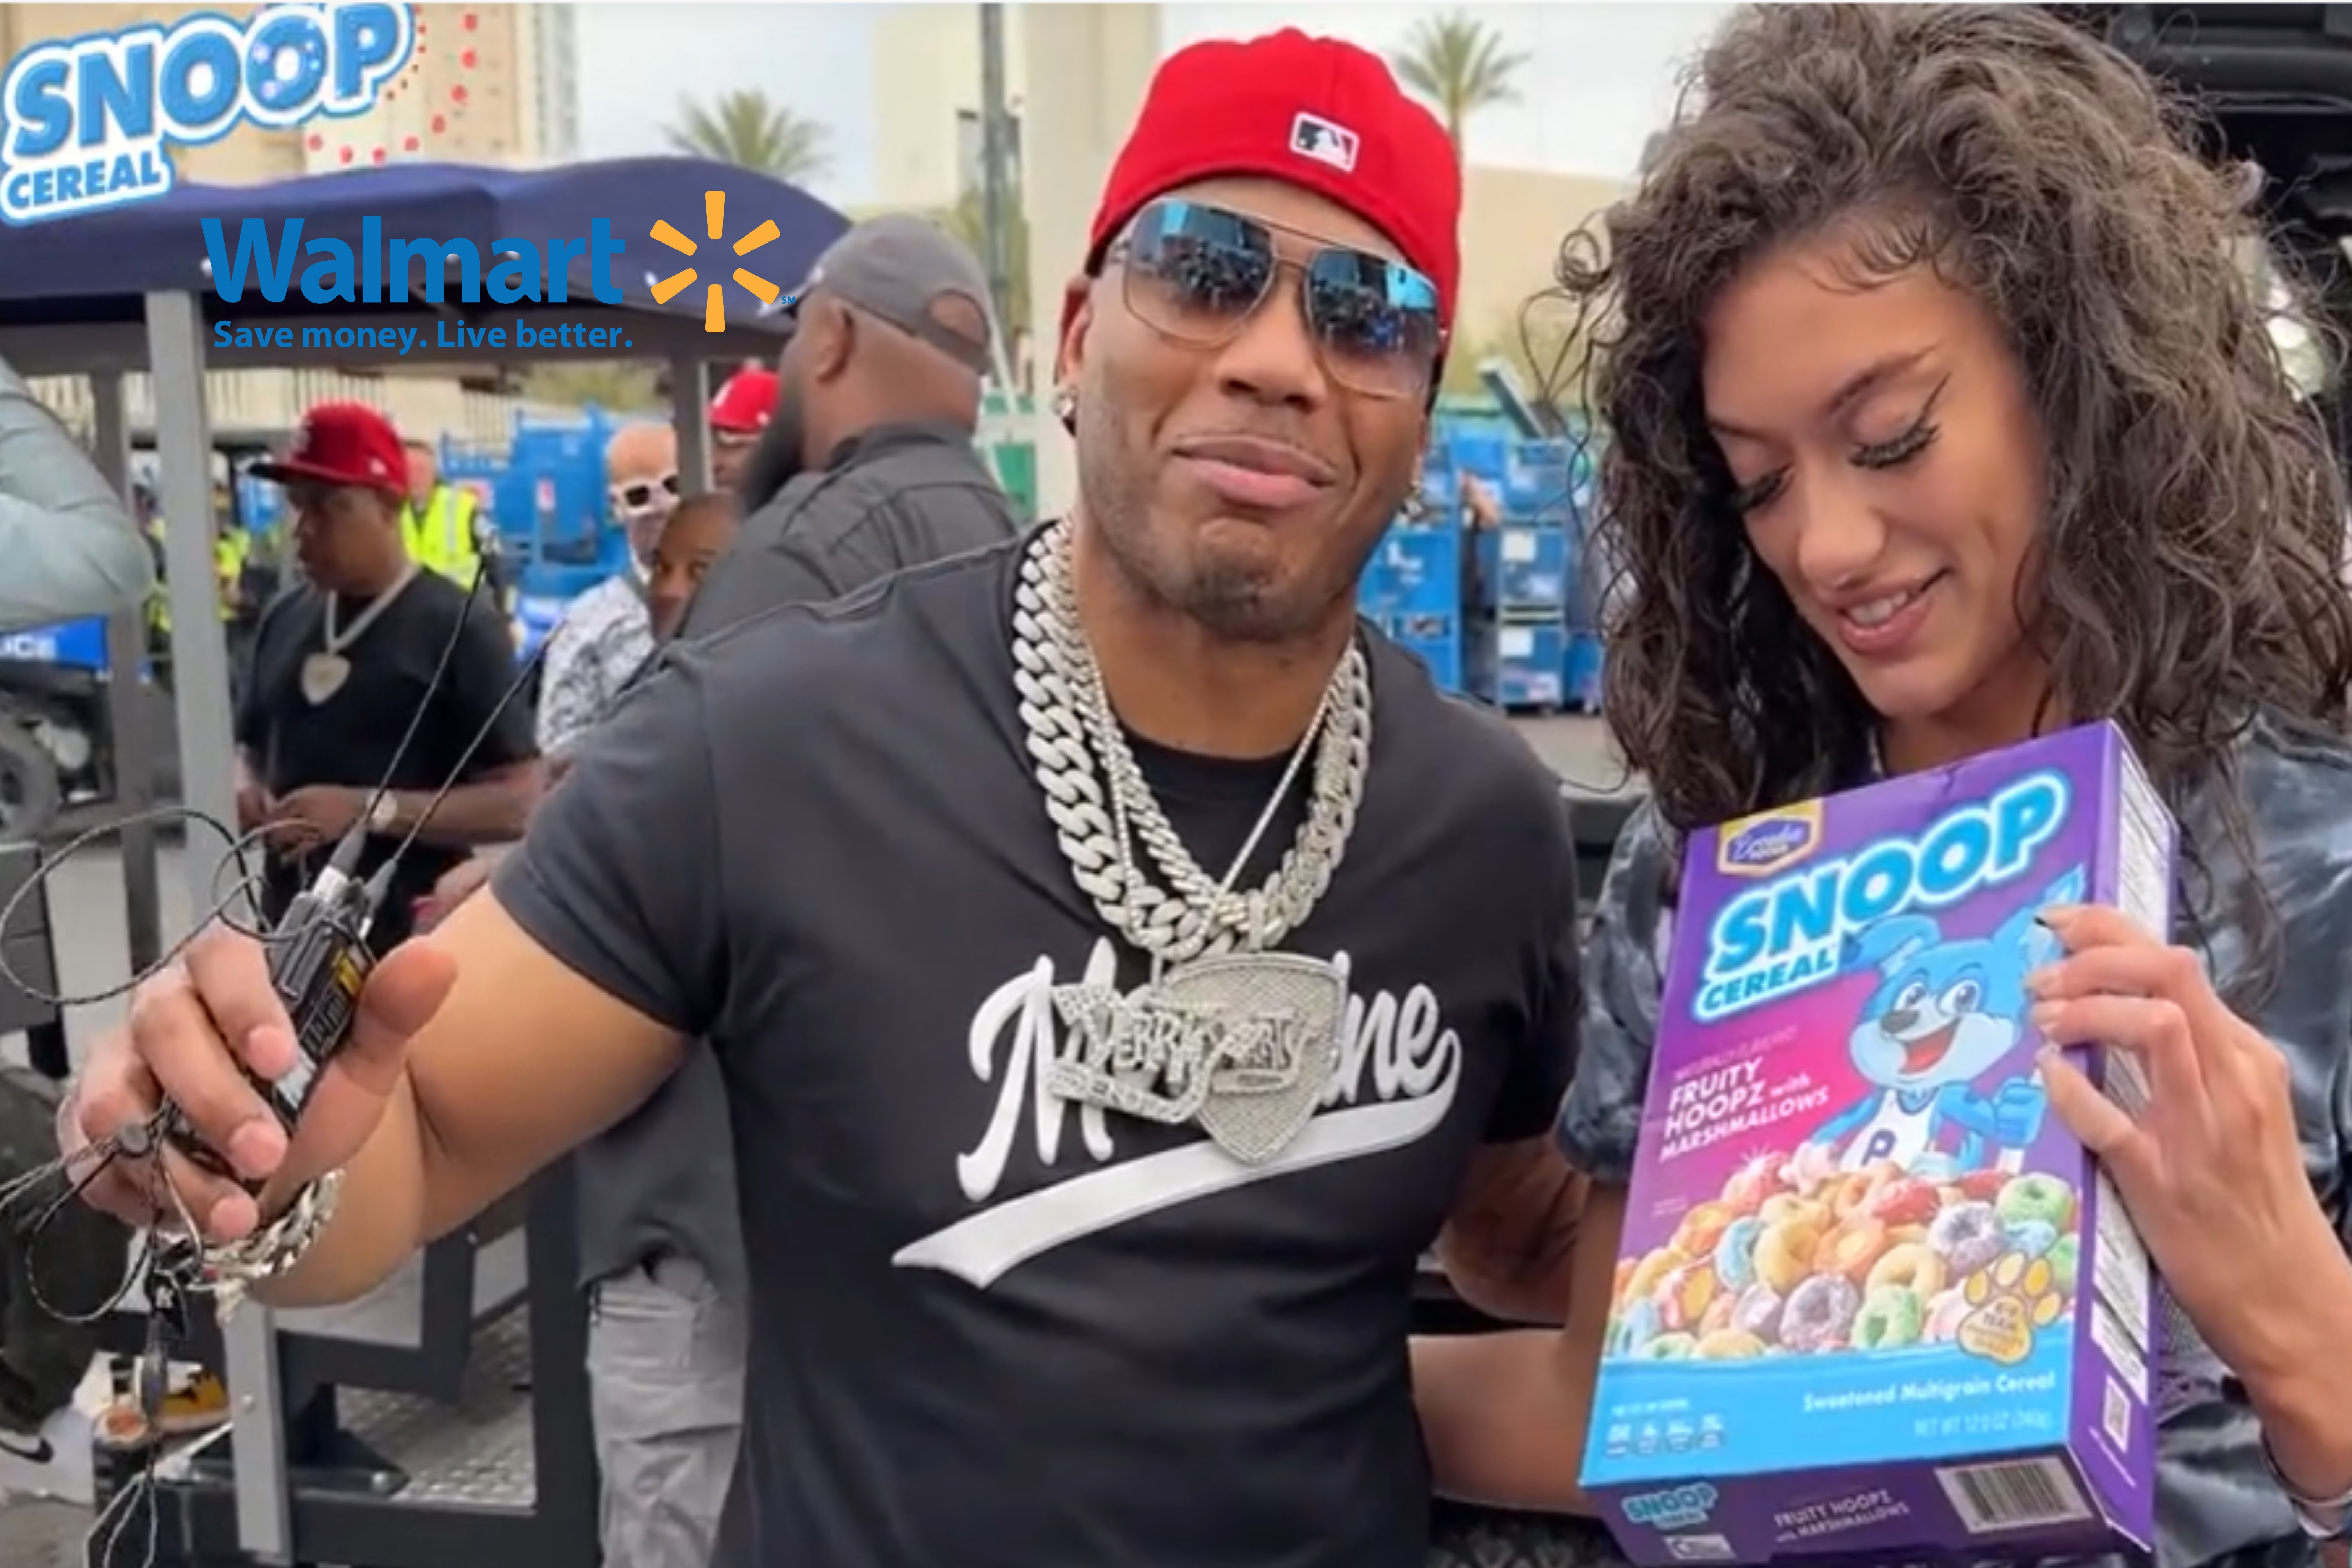 Watch: Walmart will retail “Kings of Breakfast Foods” Brand by celebrity duo Master P and Snoop Dogg